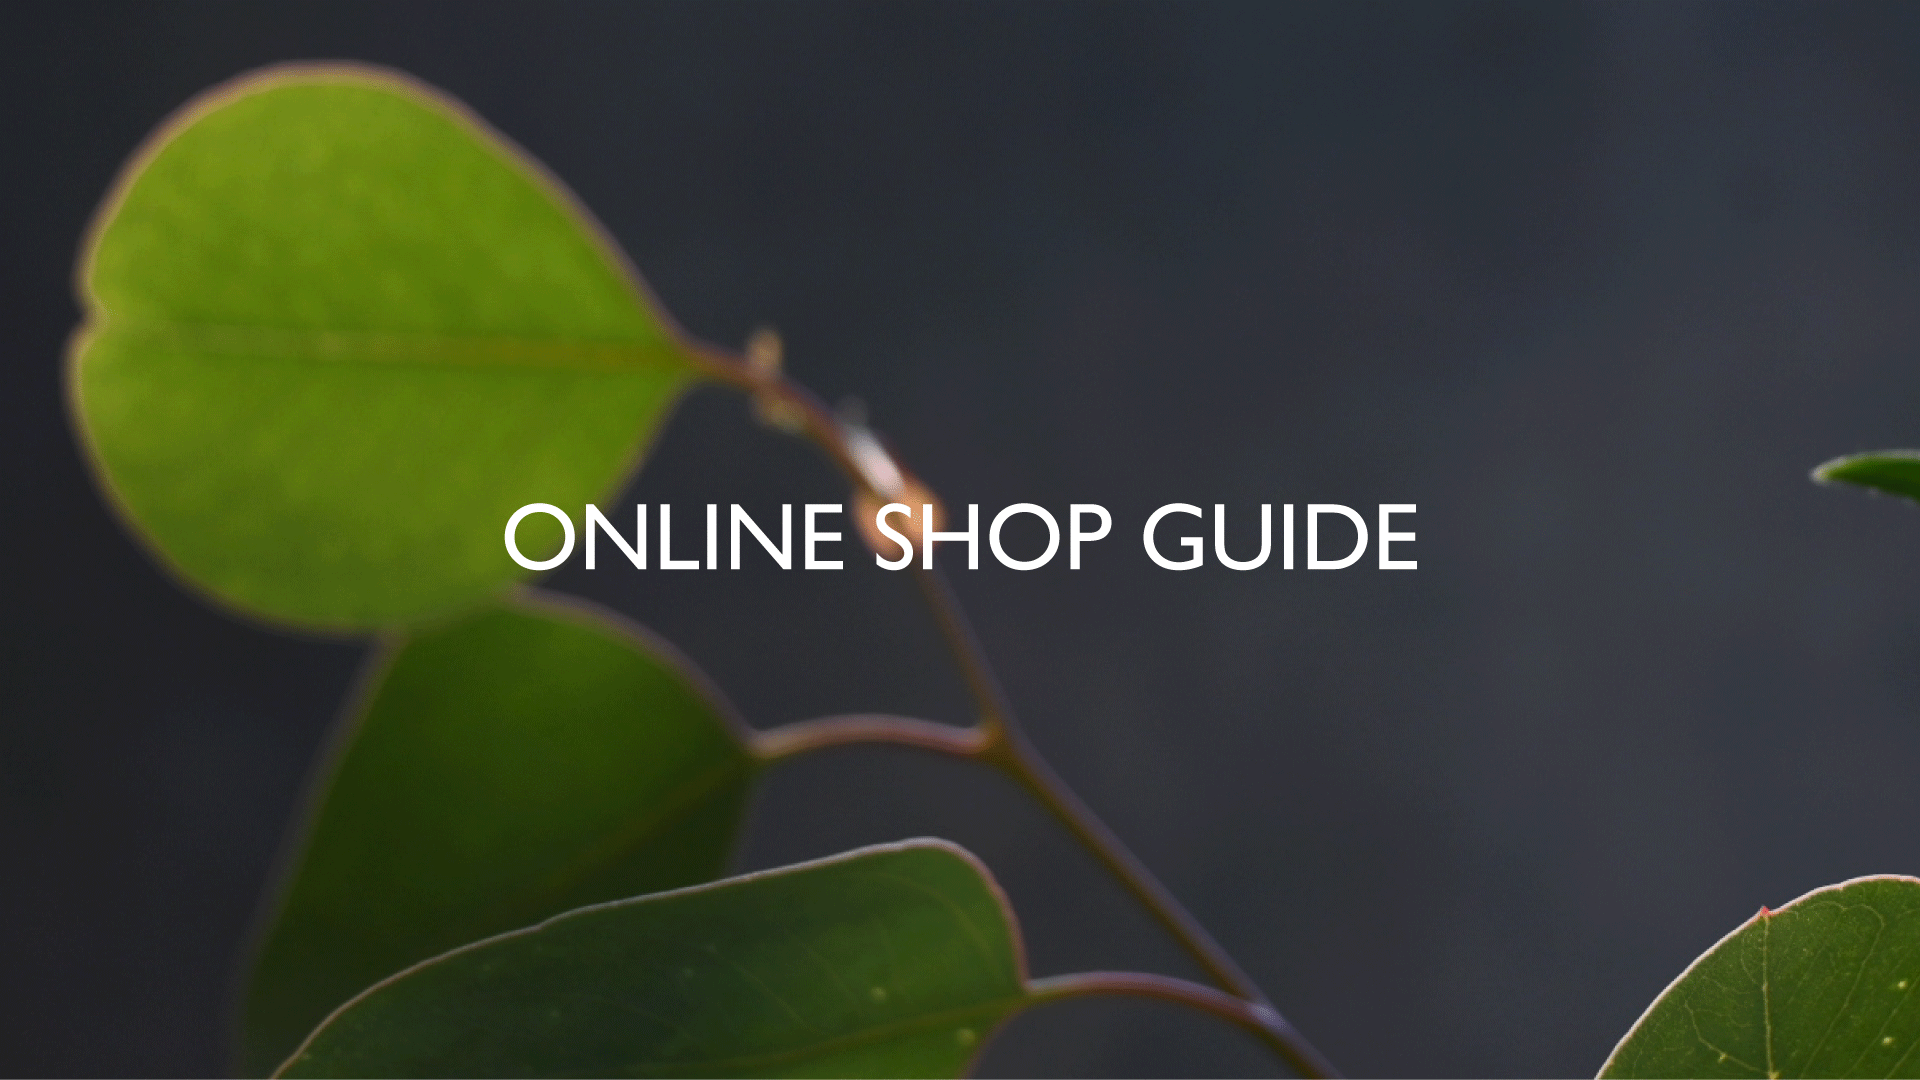 about ONLINESHOP